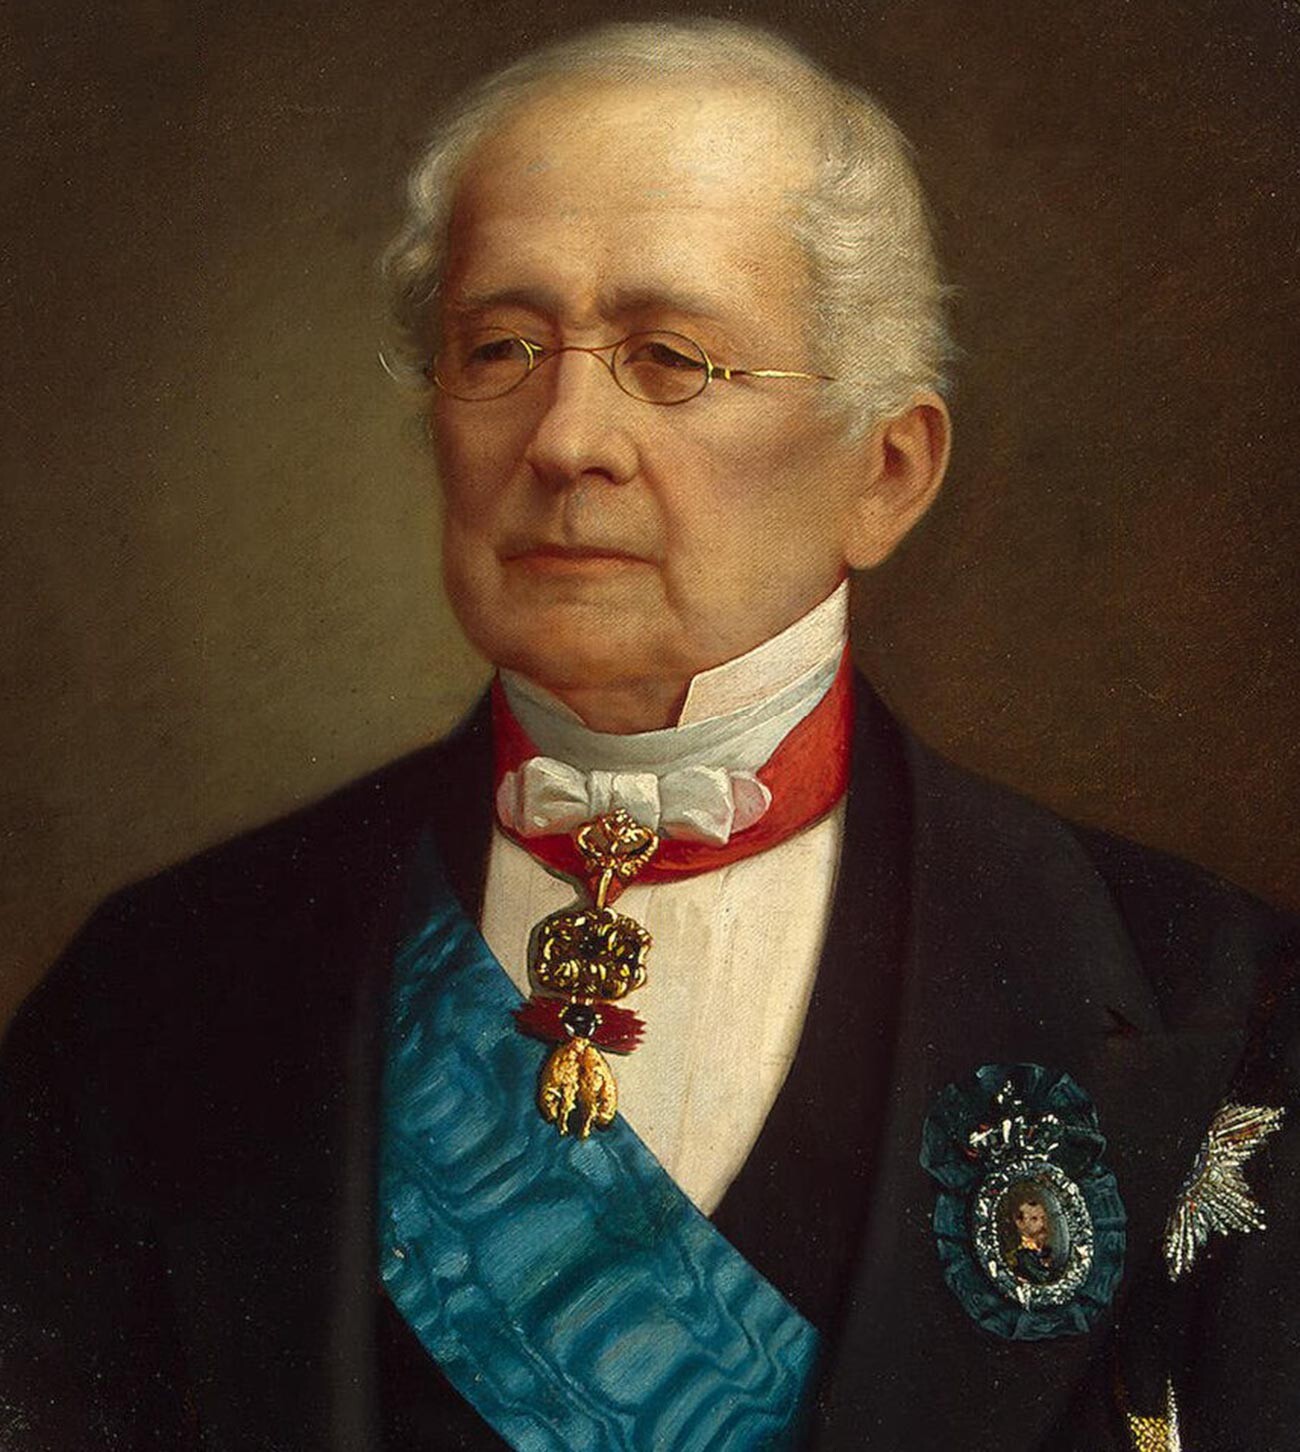 Prince Alexander Gorchakov, Foreign Minister and later Chancellor of the Russian Empire